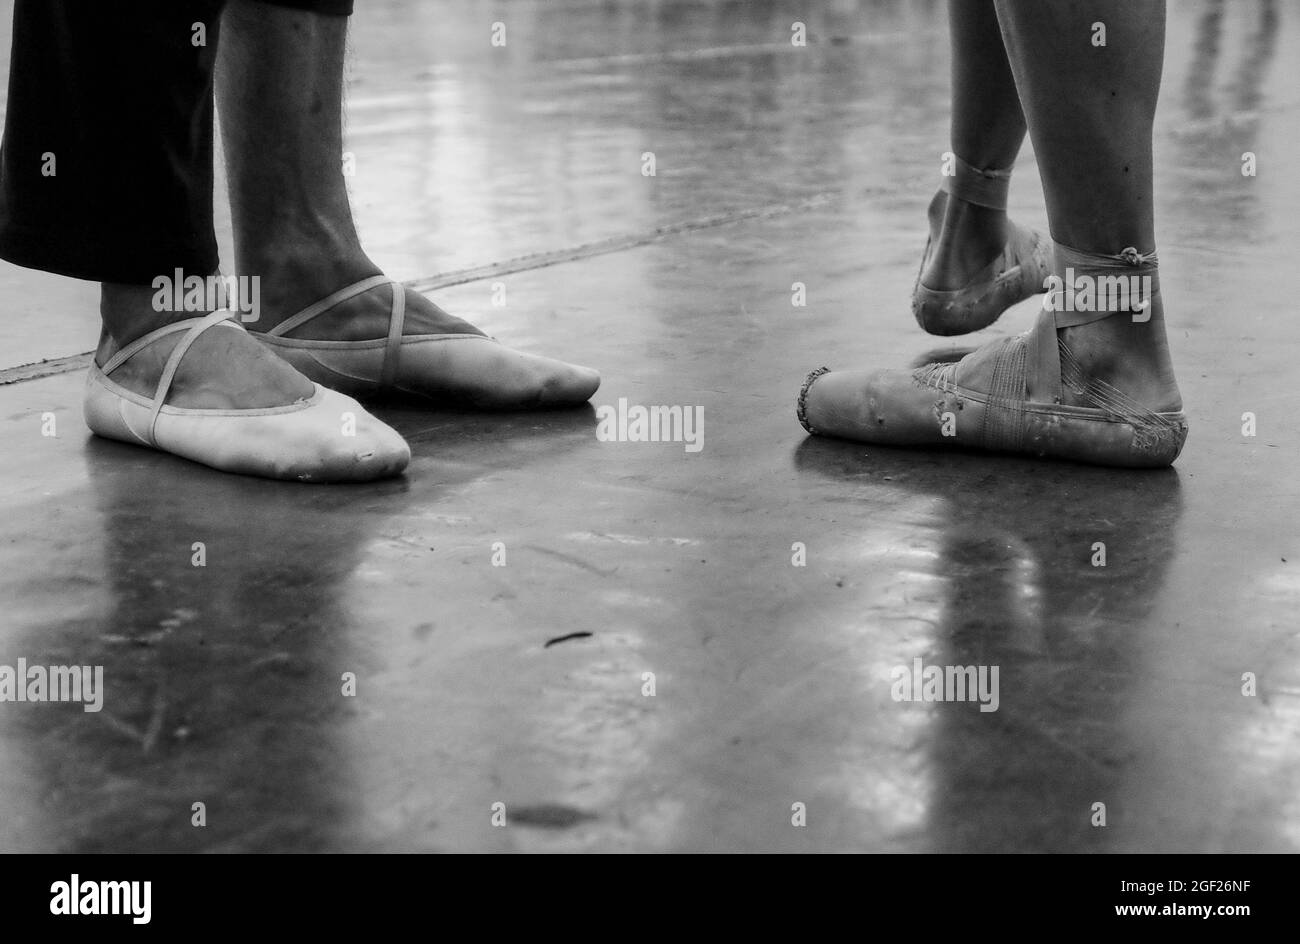 Close up images of ballet shoes used by dancers in a rehearsal hall in Saint Petersburg, Russia Stock Photo